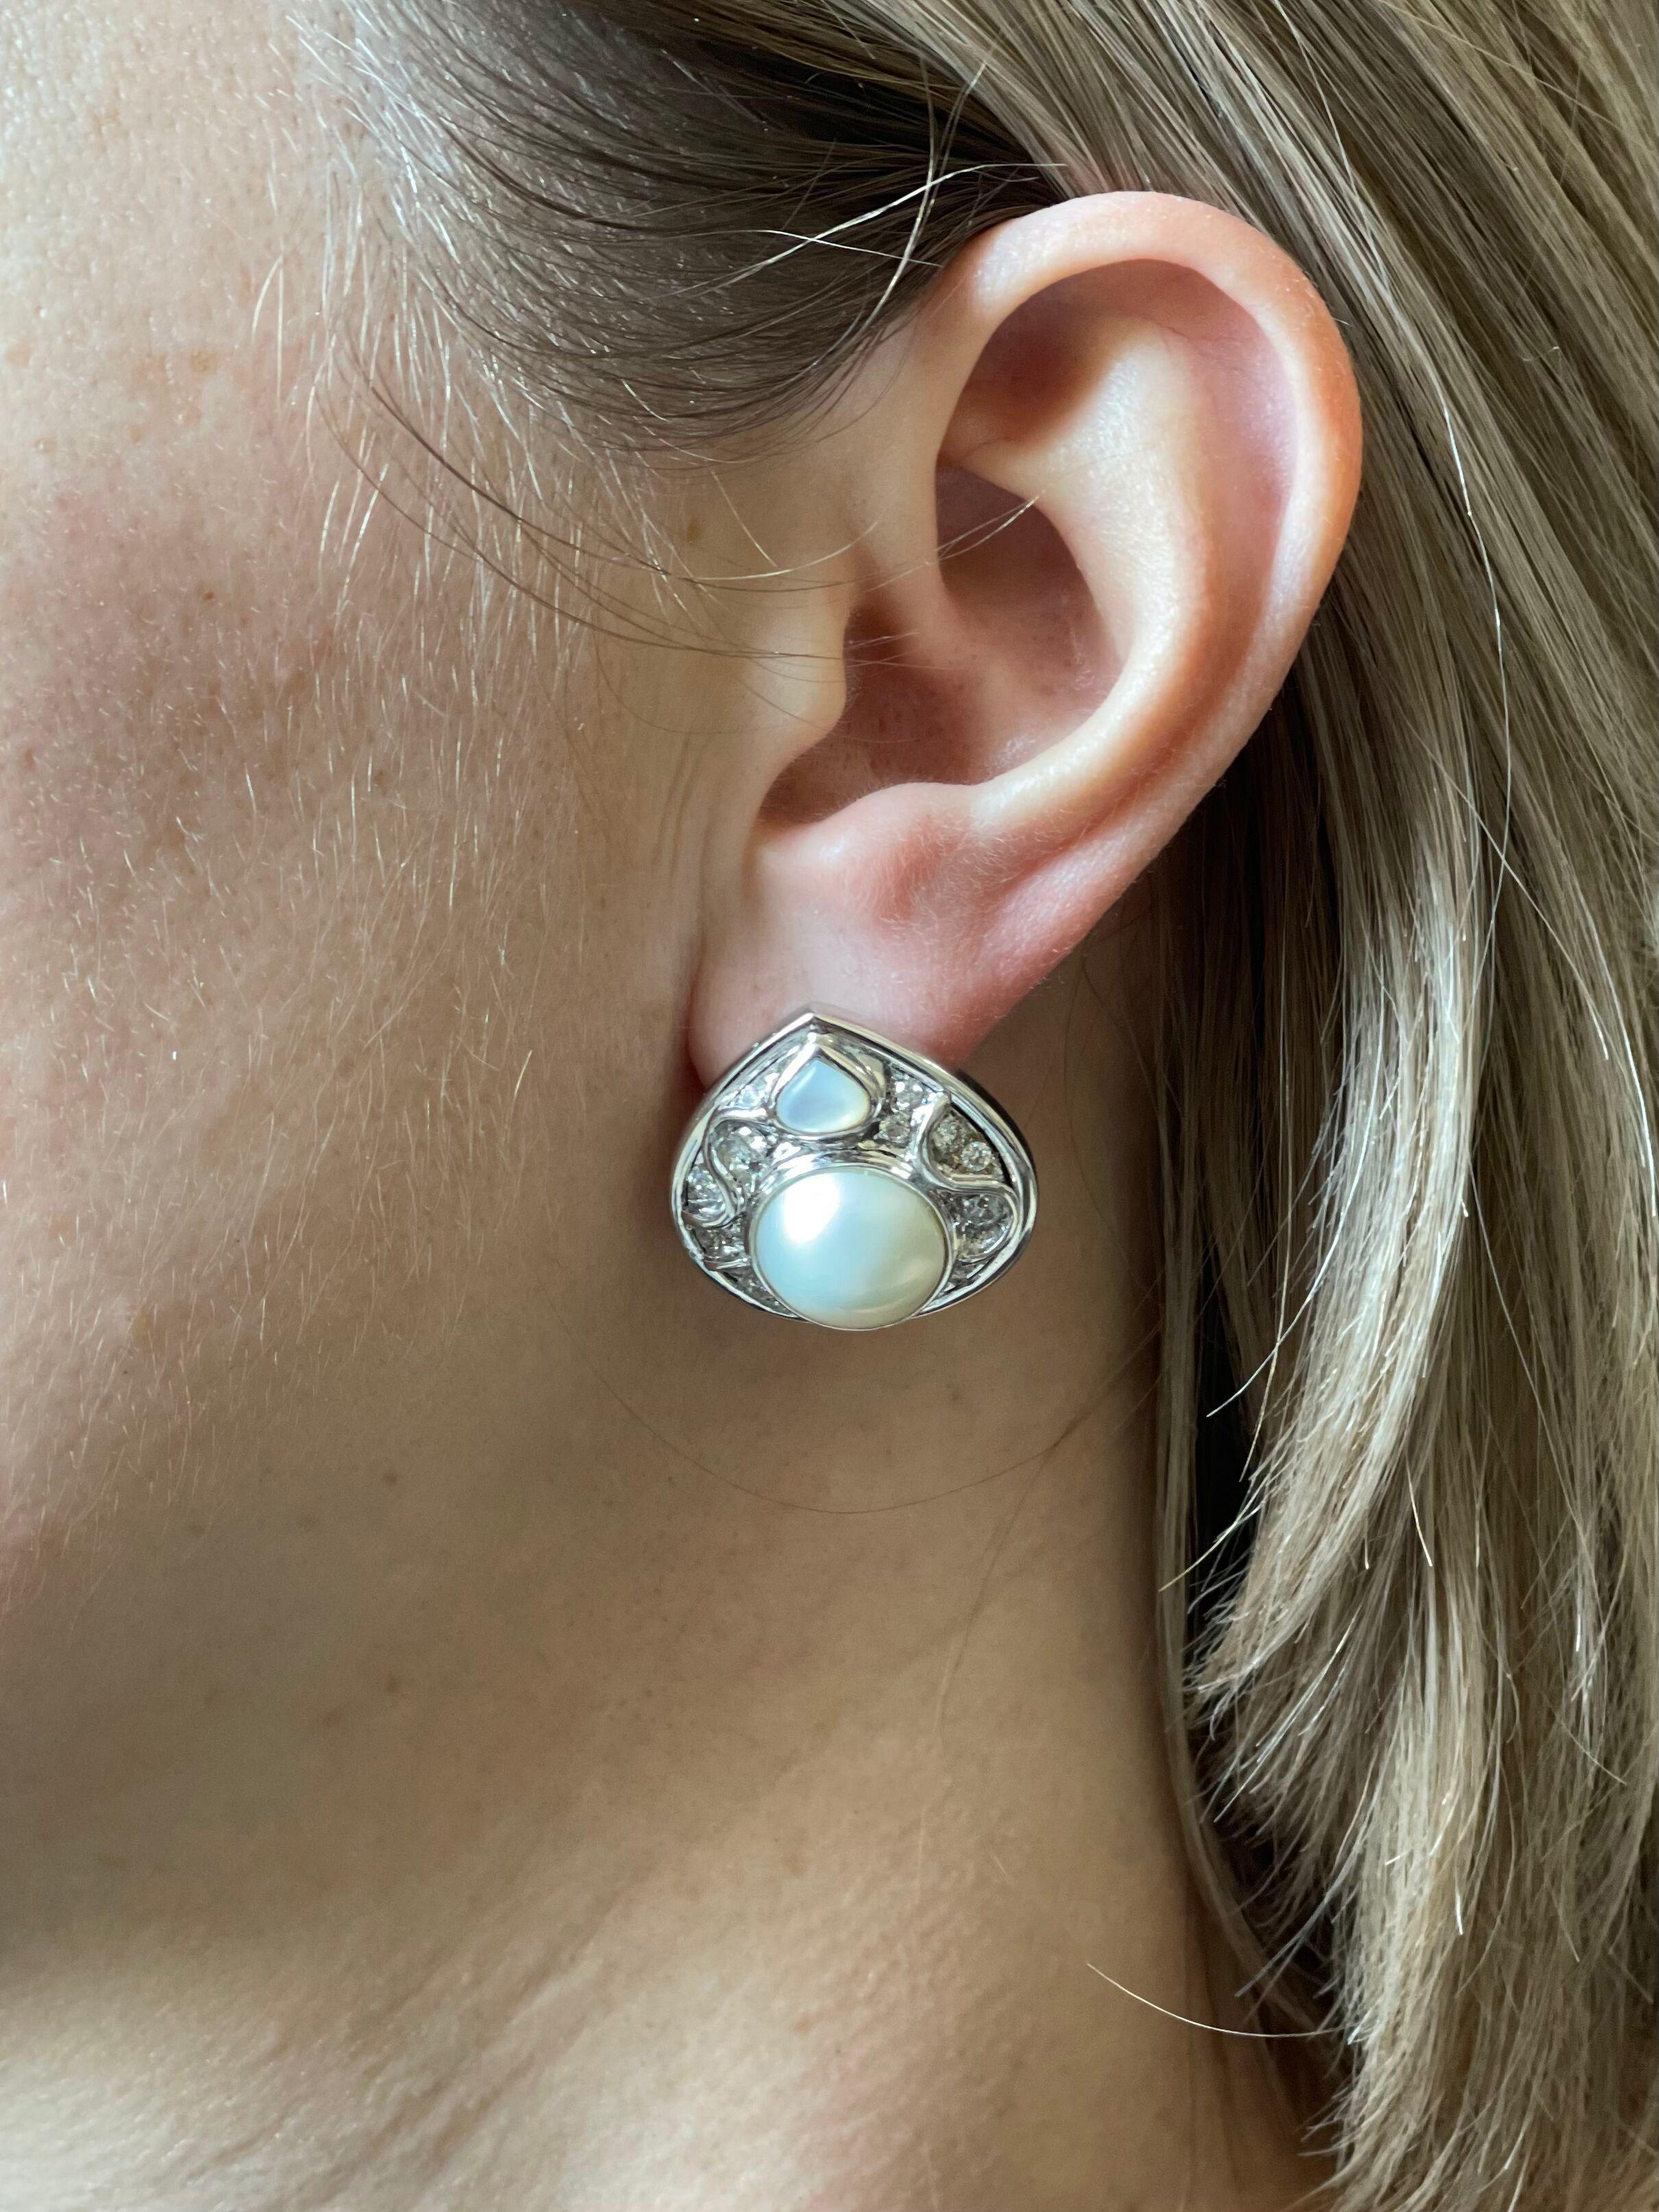 Pair of 18k white gold earrings by Marina B, set with mother of pearl, 12.5mm mabe pearls in the center, surrounded with approx. 0.40ctw G/VS diamonds. Earrings measure 1